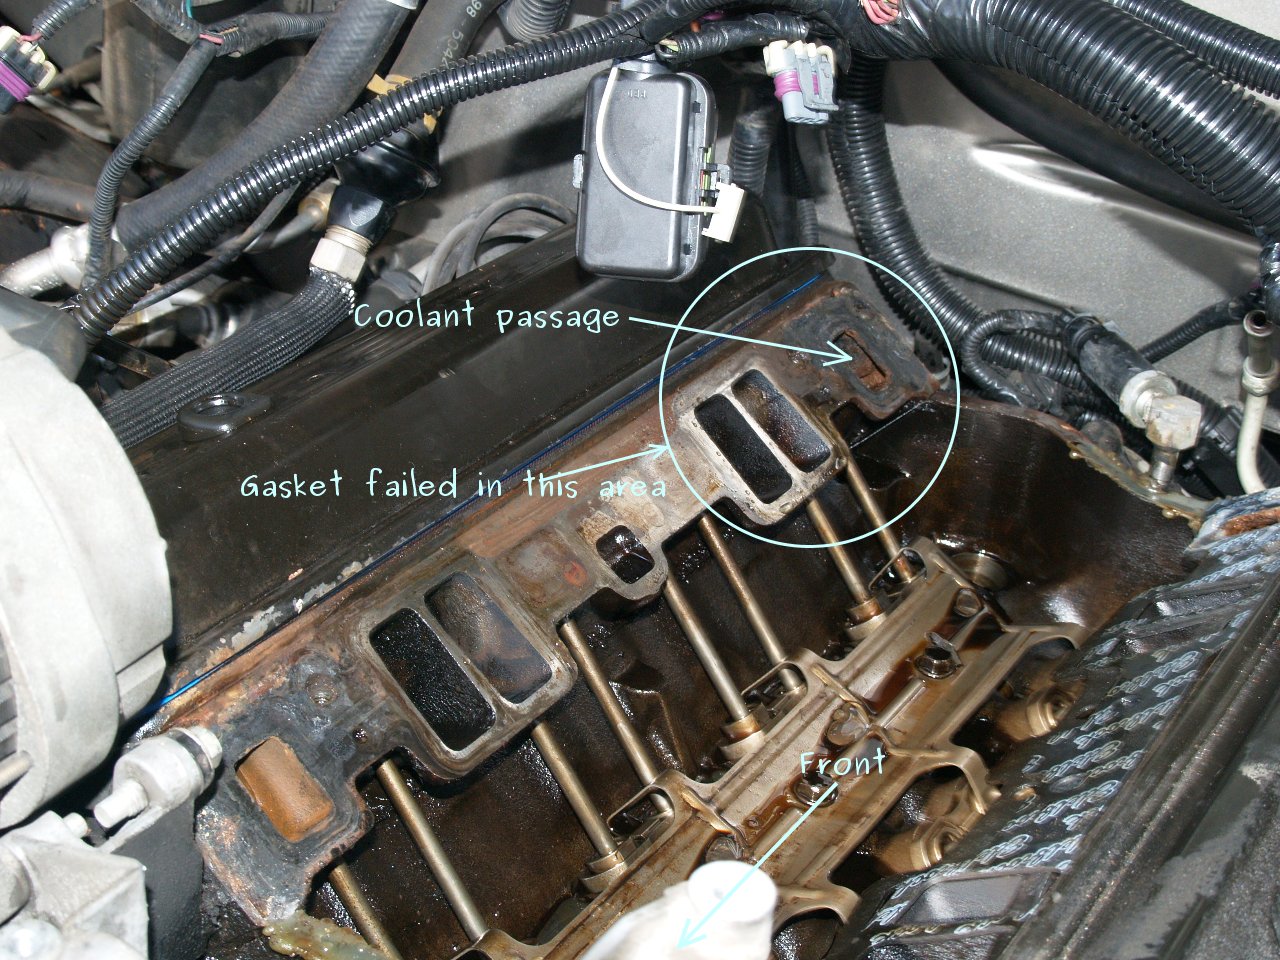 See P009D in engine